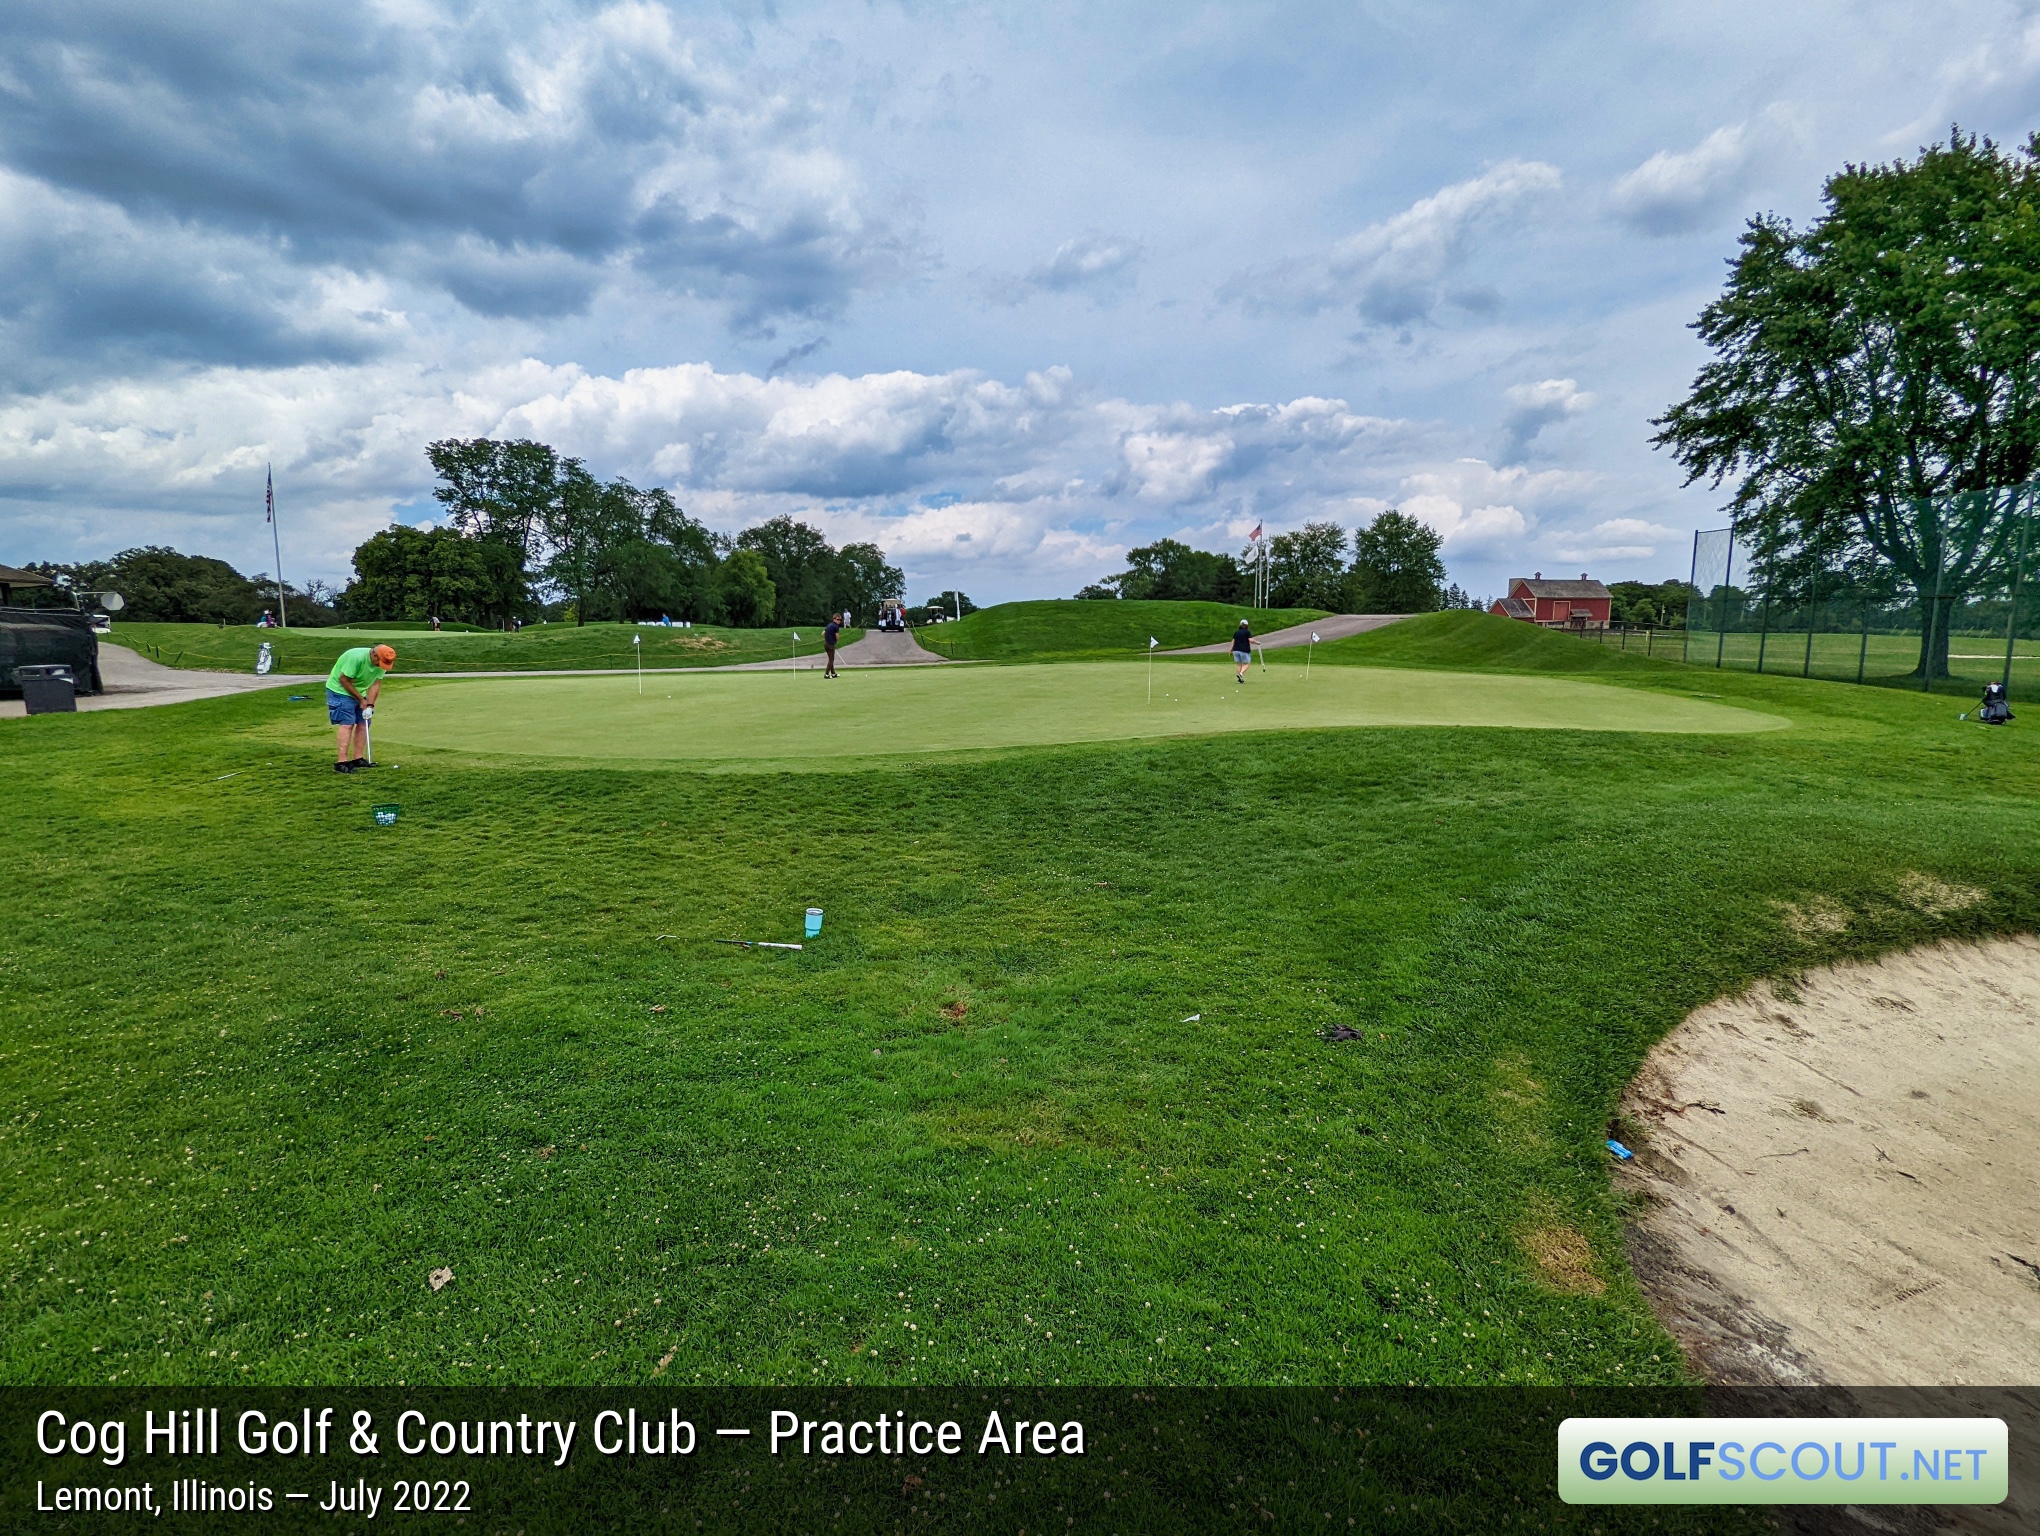 Photo of the practice area at Cog Hill Course #4 - Dubsdread in Lemont, Illinois. 